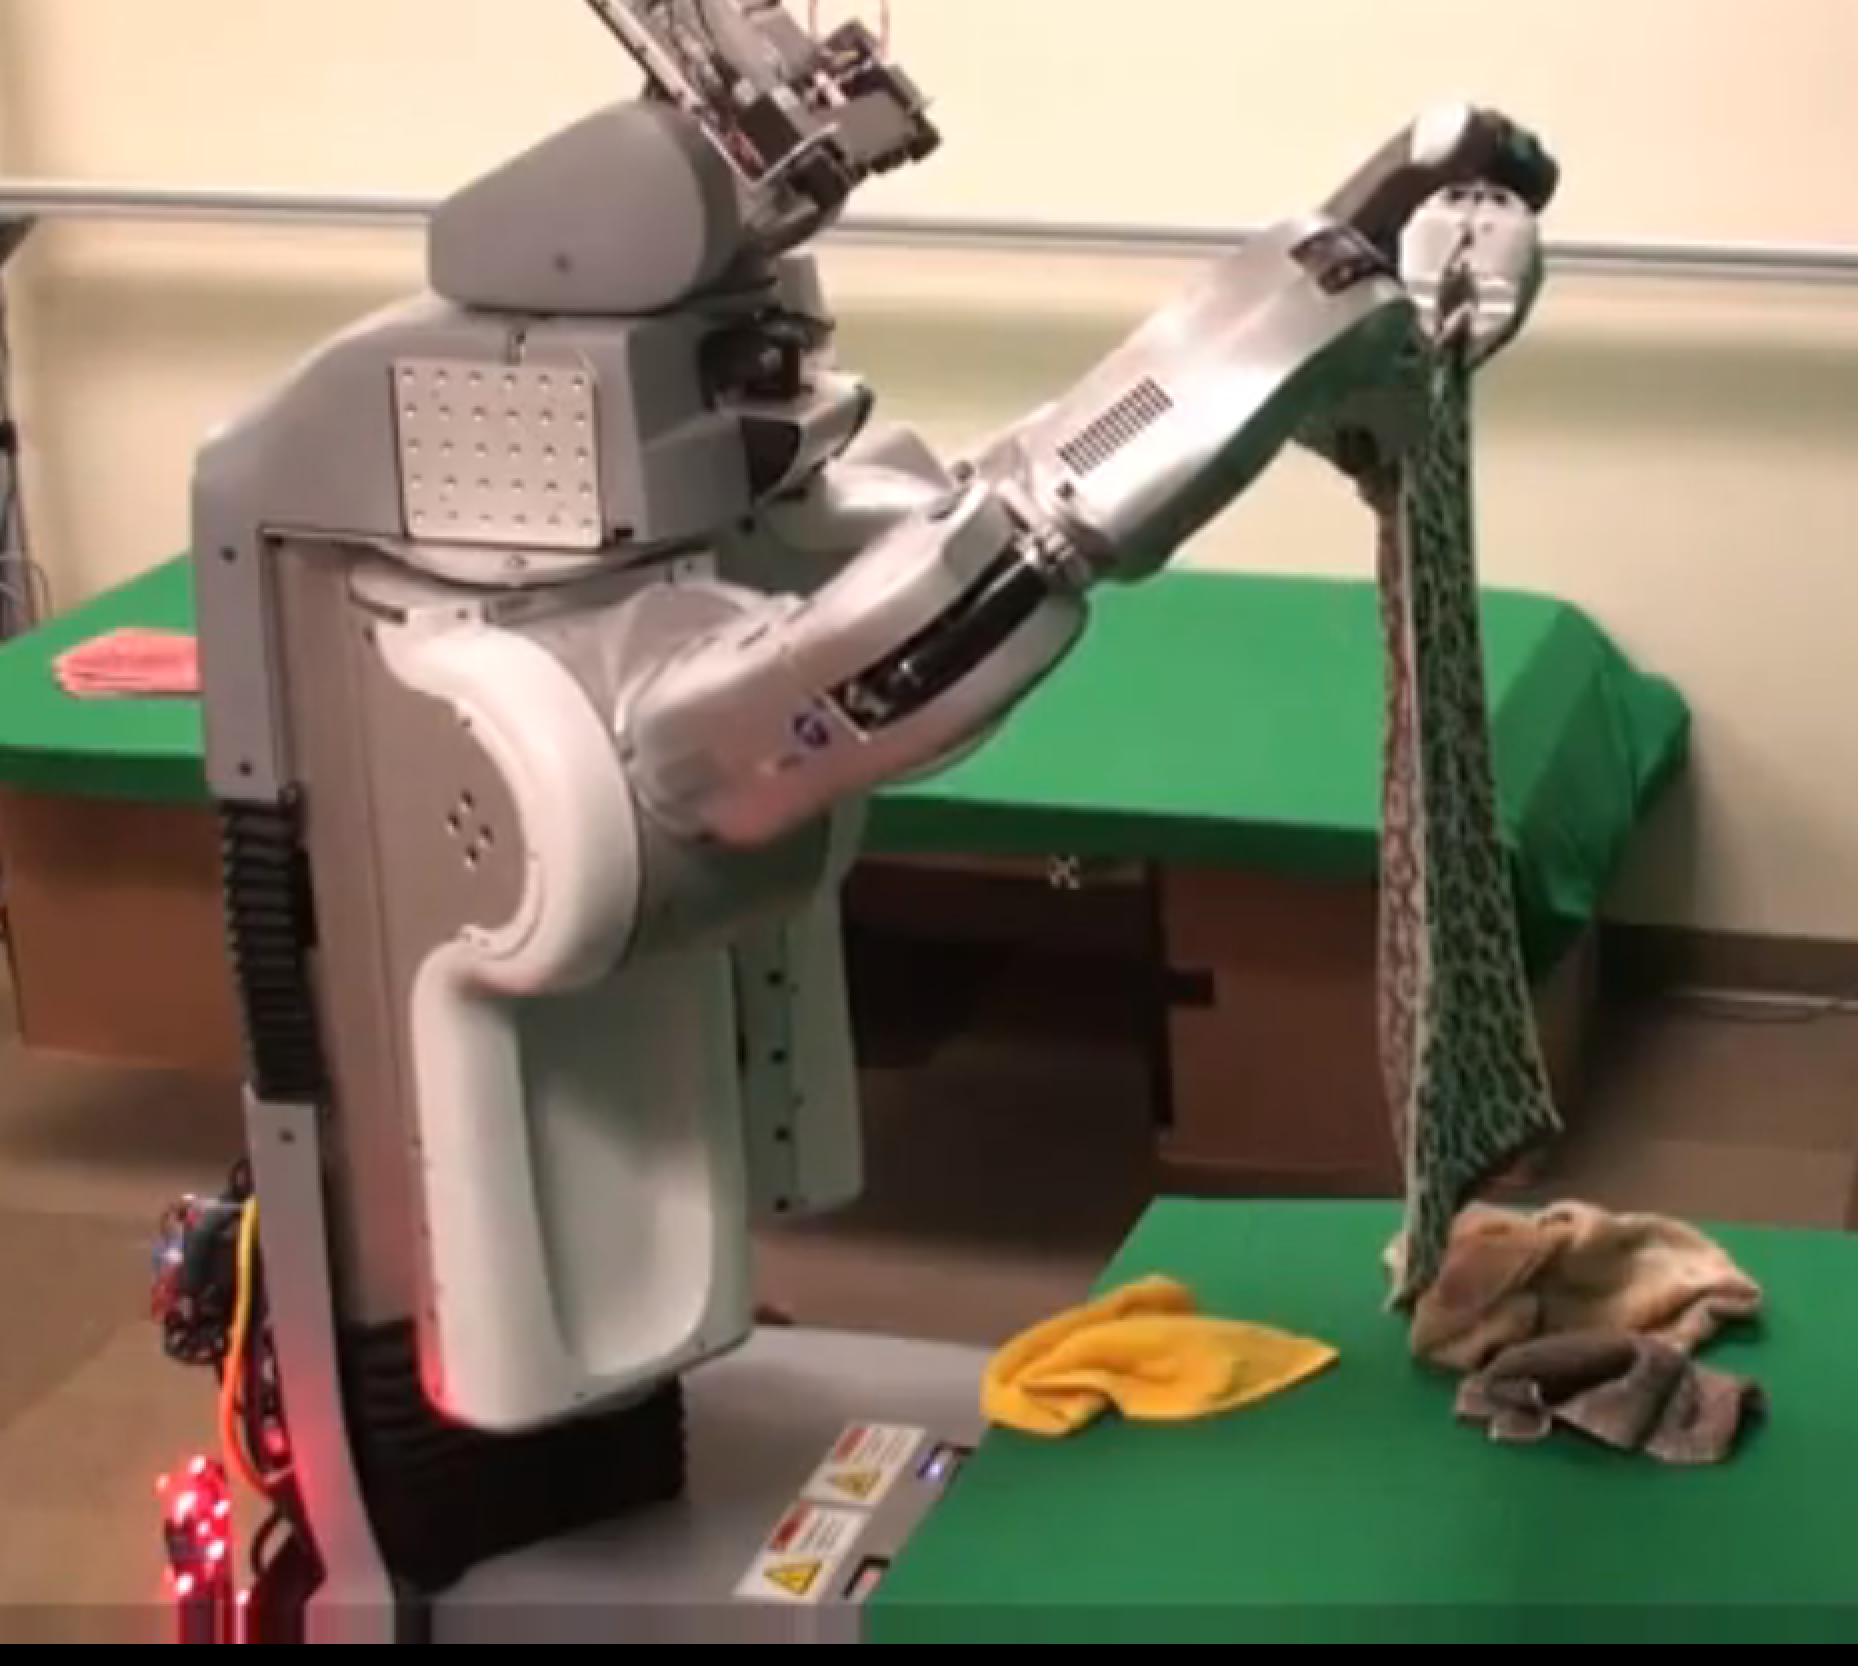 Robot folds clothes - seriously